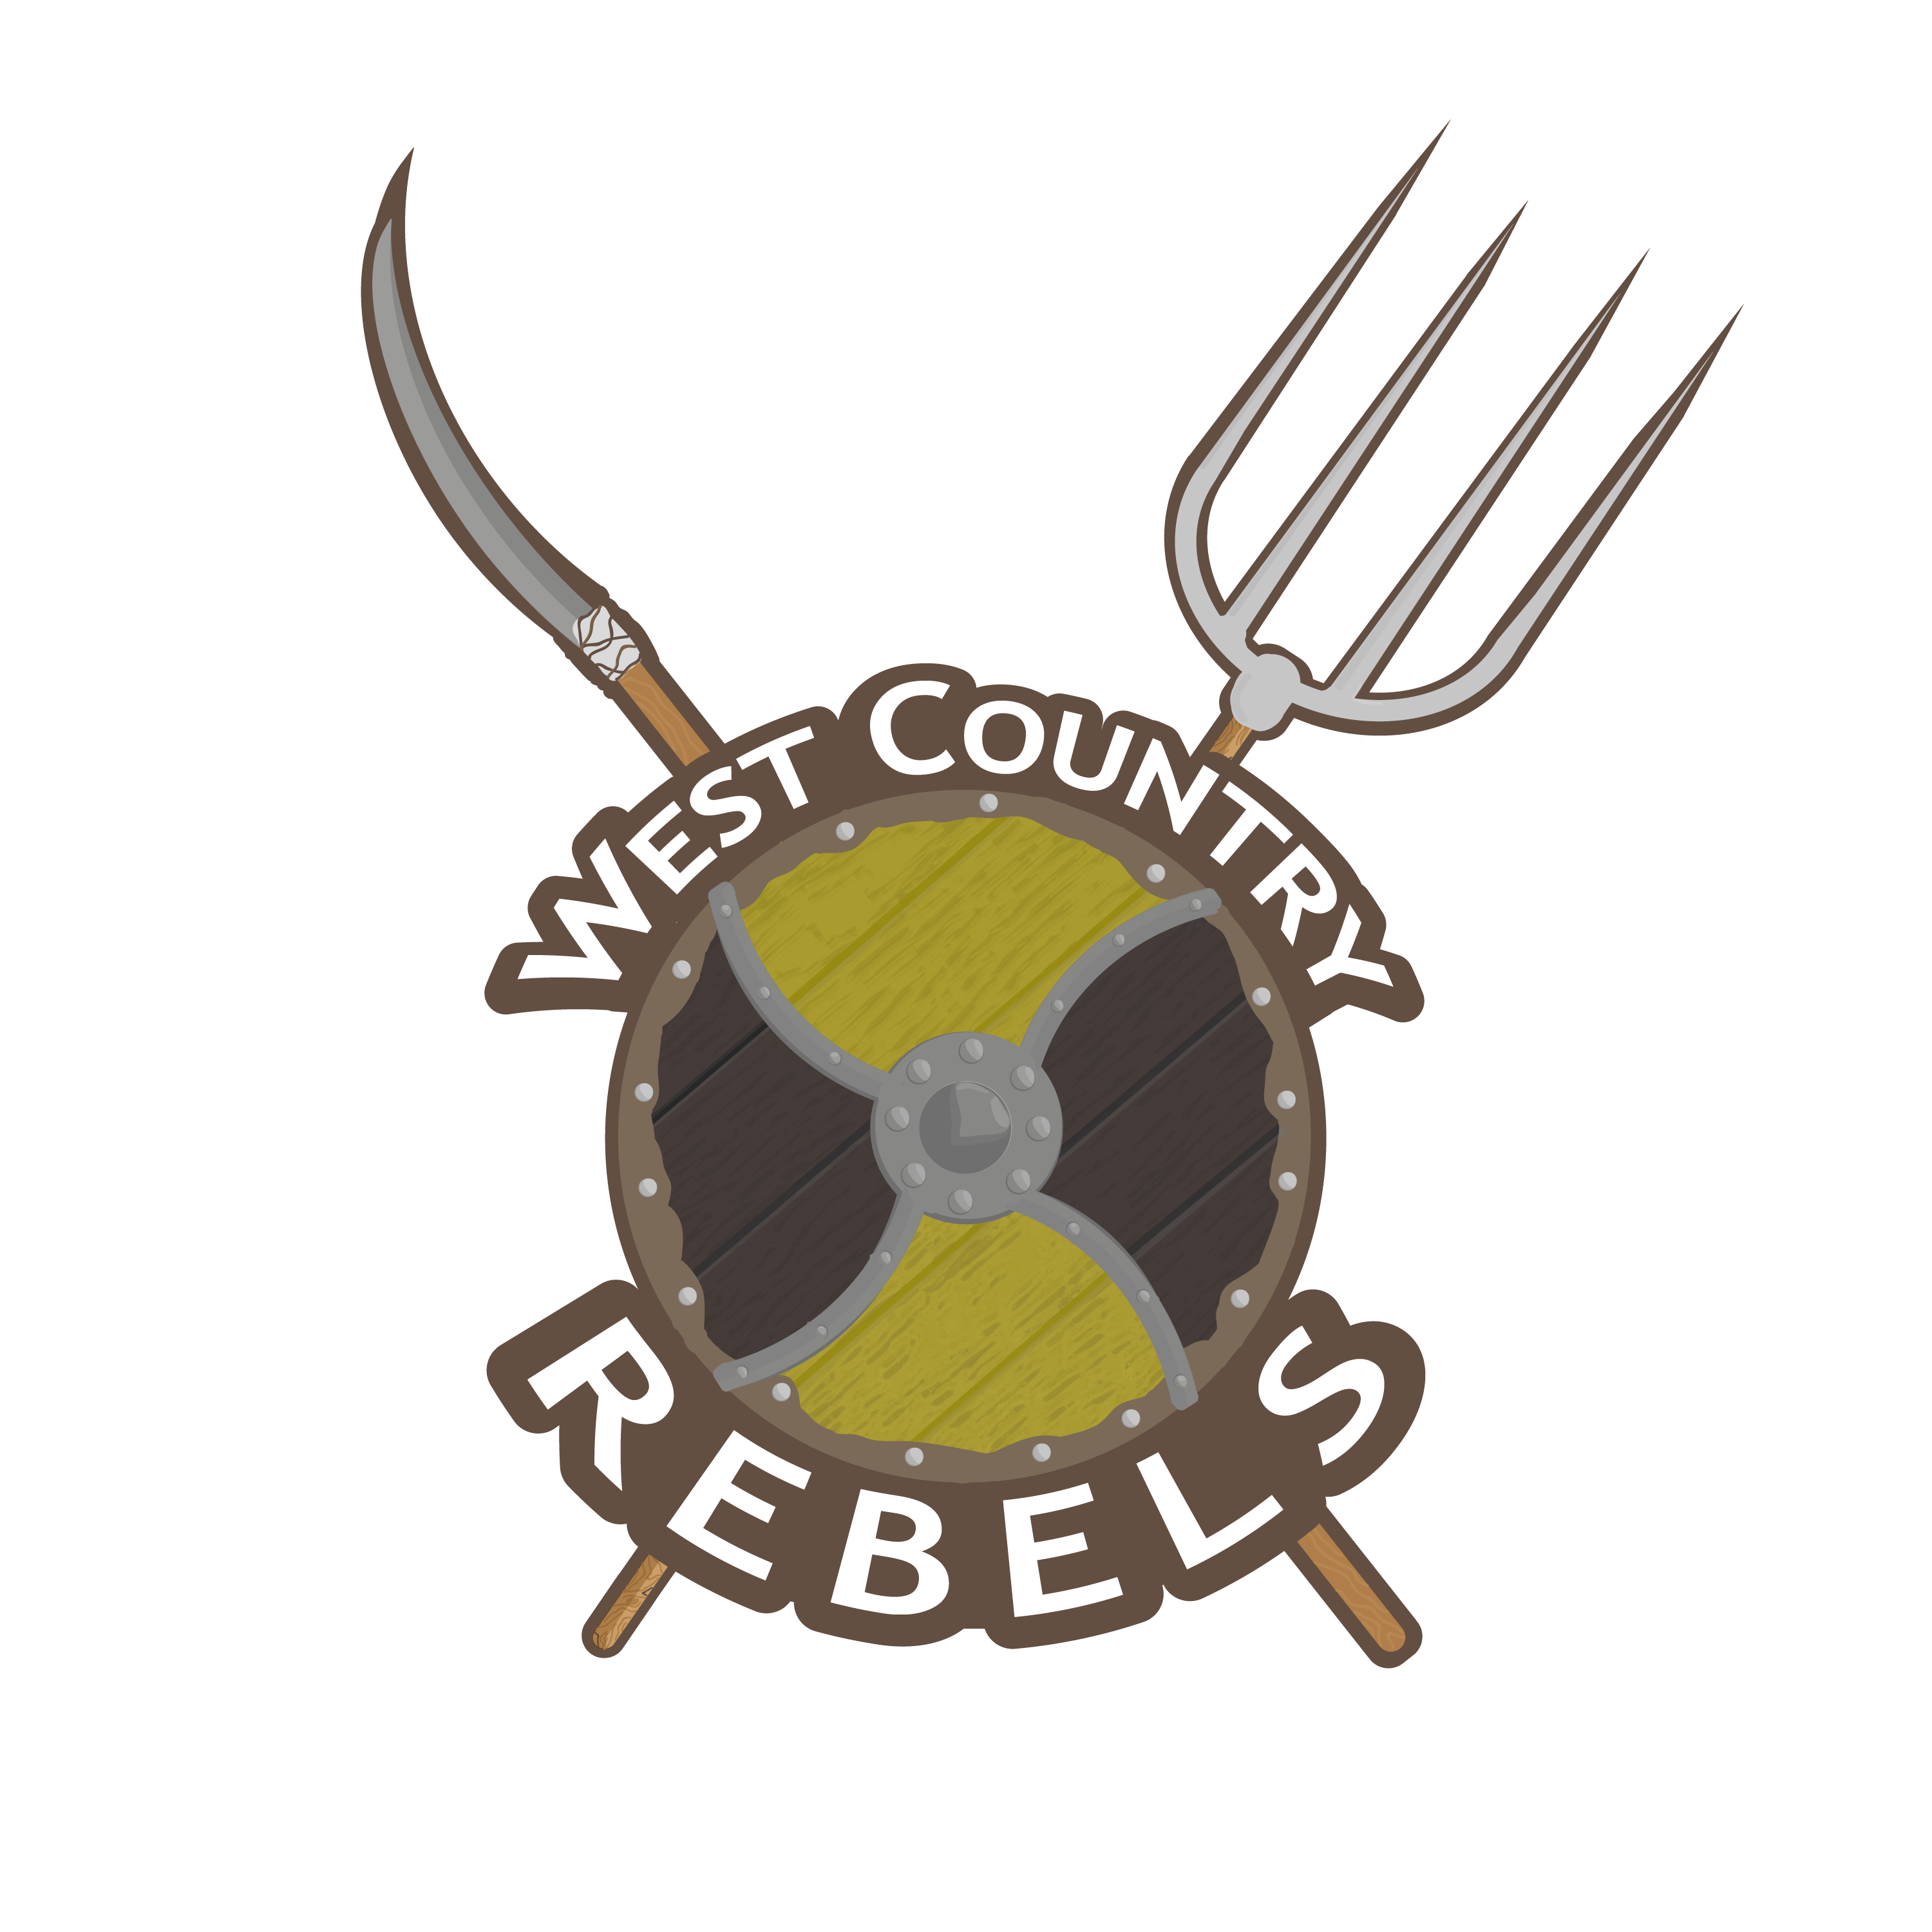 West Country Rebels logo